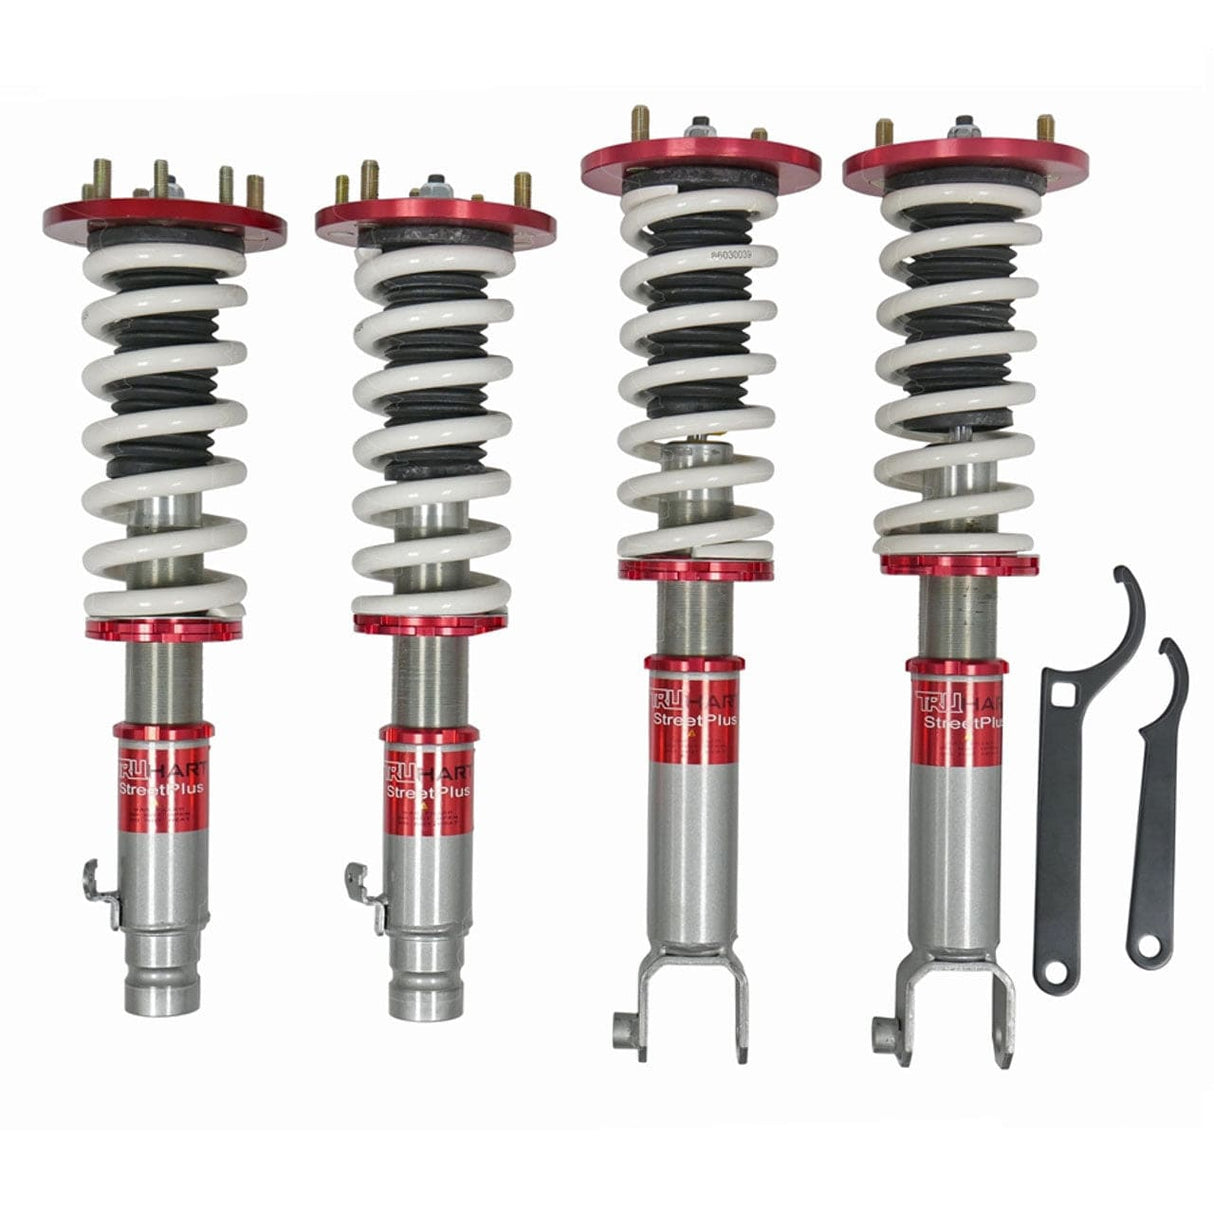 TruHart StreetPlus Coilovers for 2010-2015 Honda Accord Crosstour